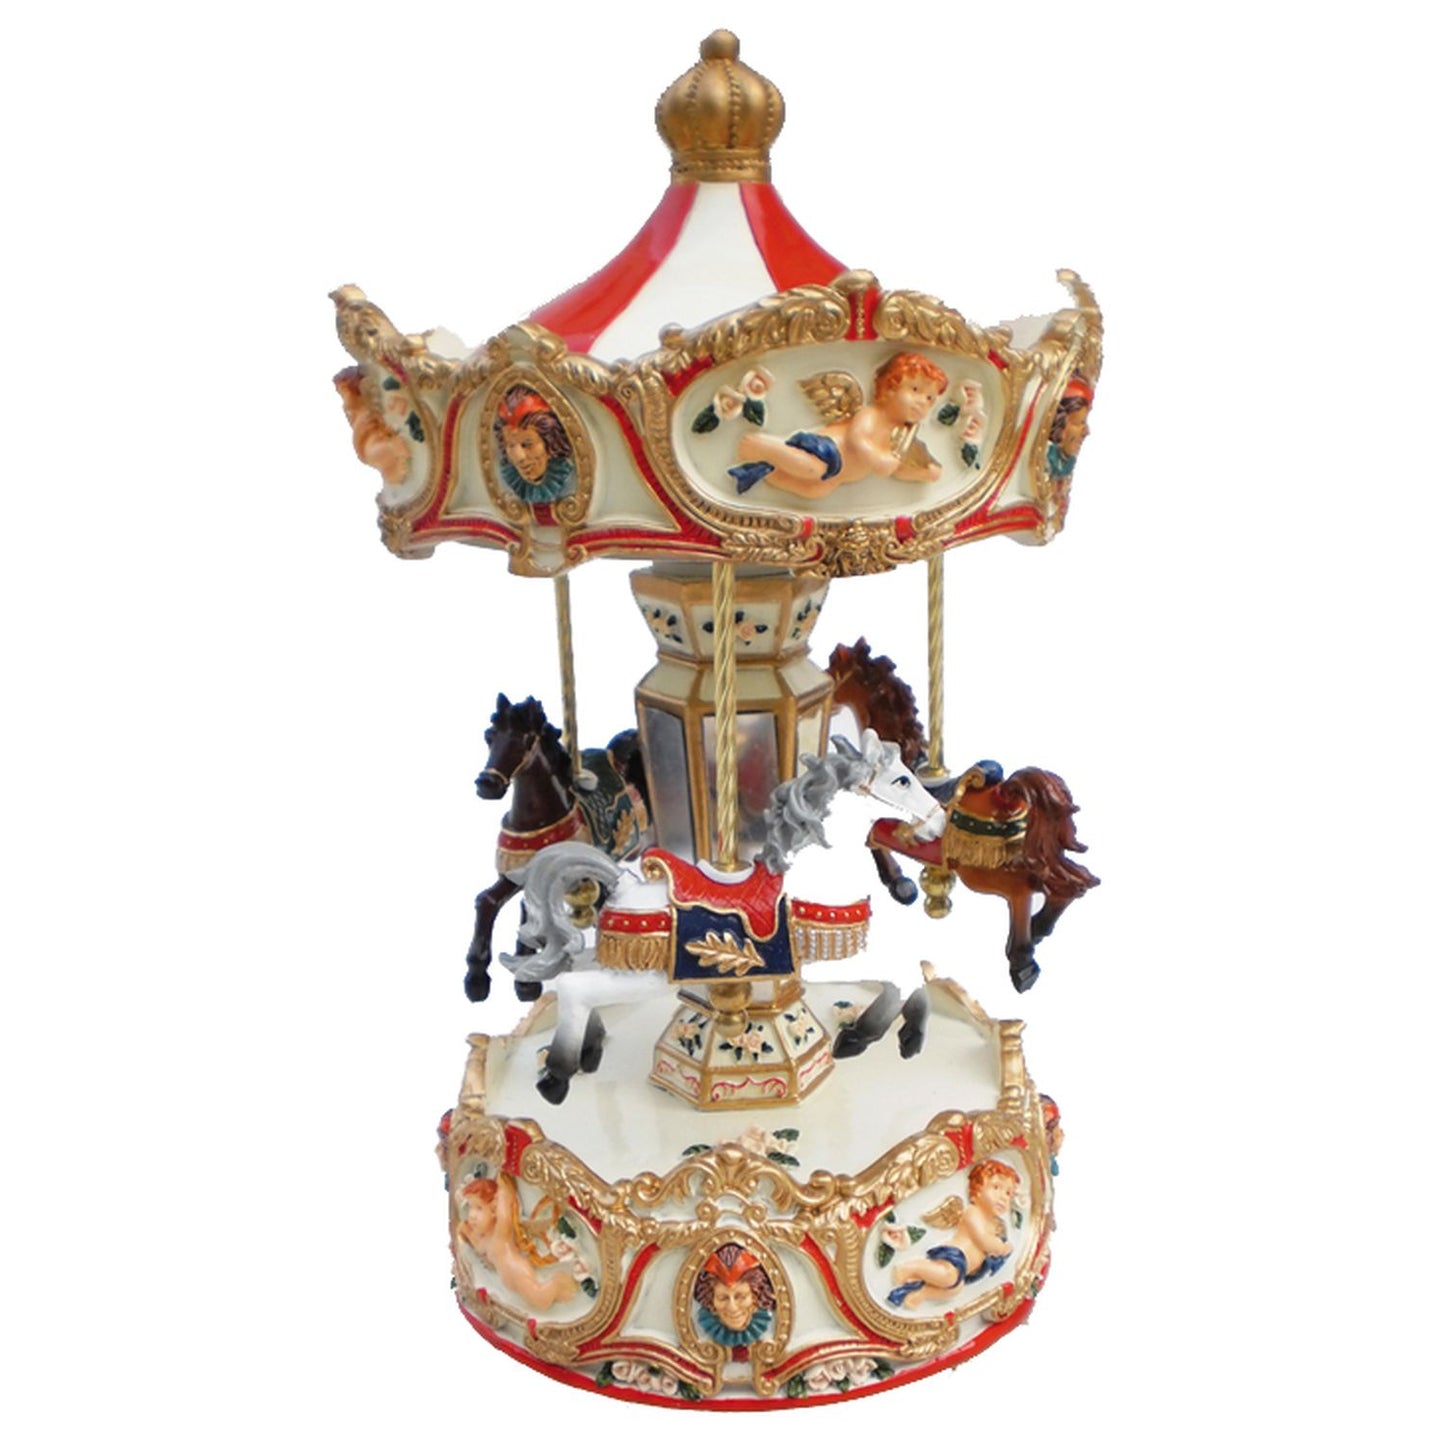 Musicbox Kingdom 9.1" Angel Grand Carousel Red Turns To The Melody “Rigoletto”